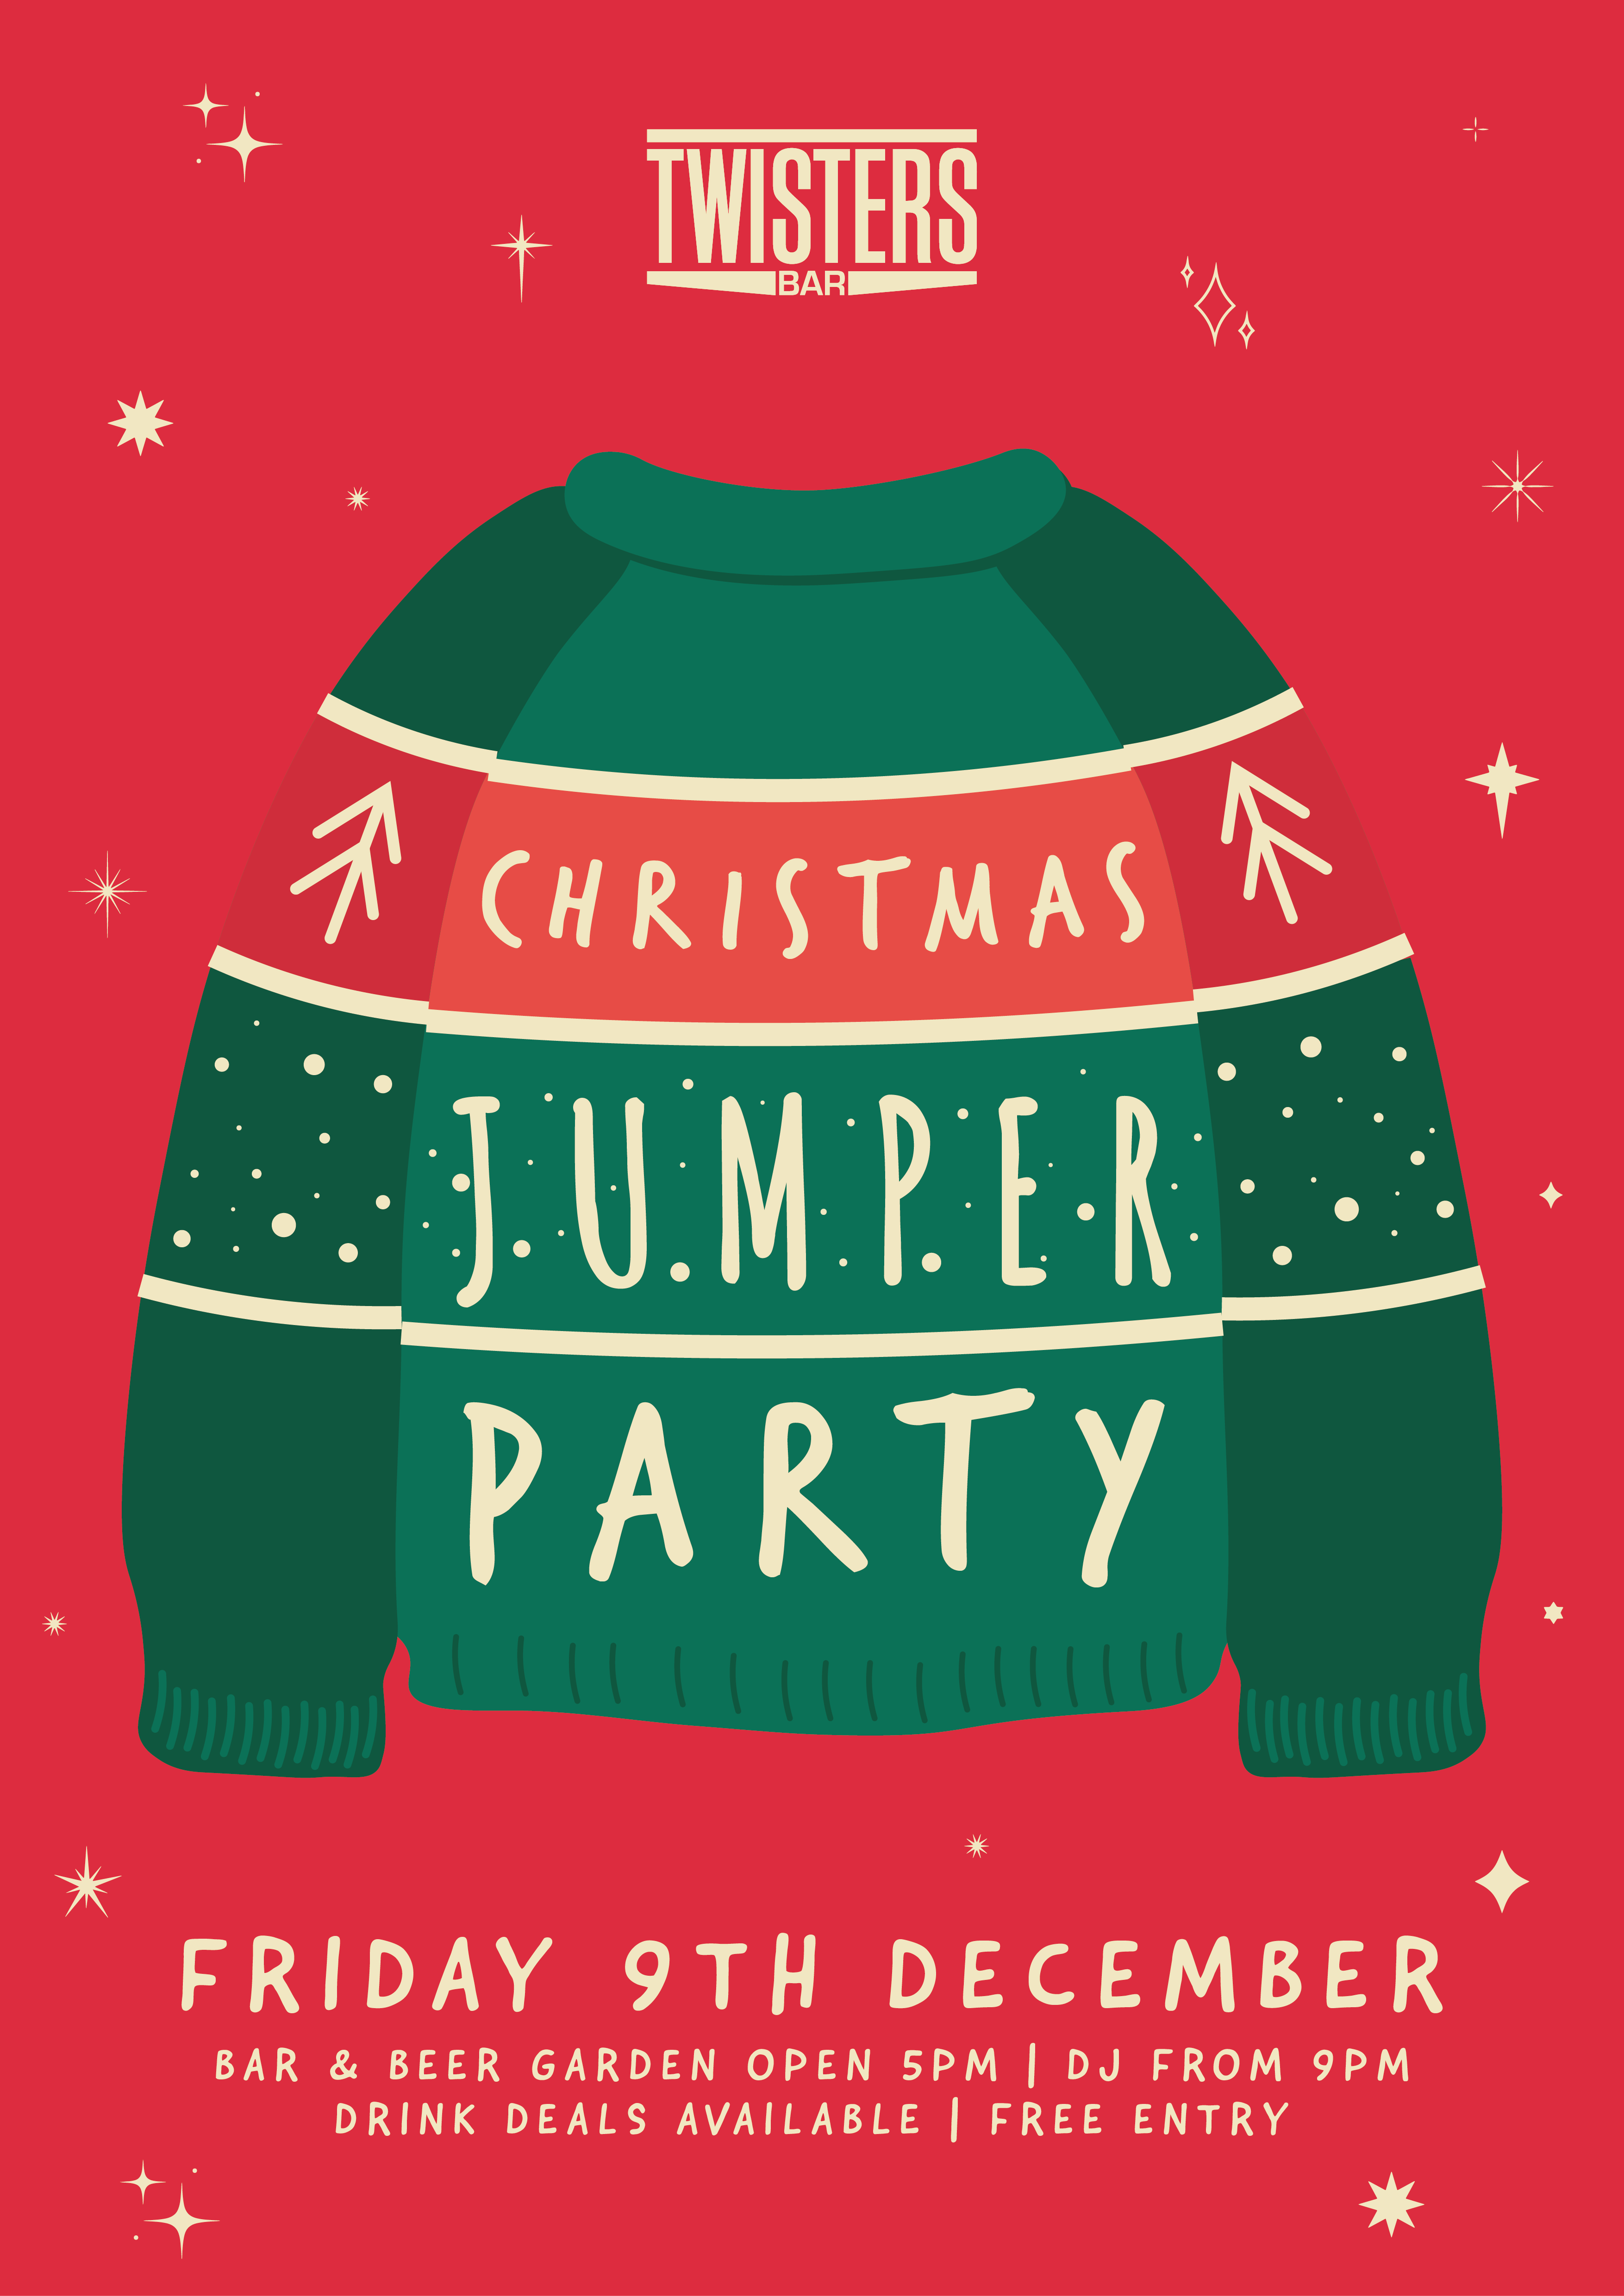 Twisters Christmas Jumper Party